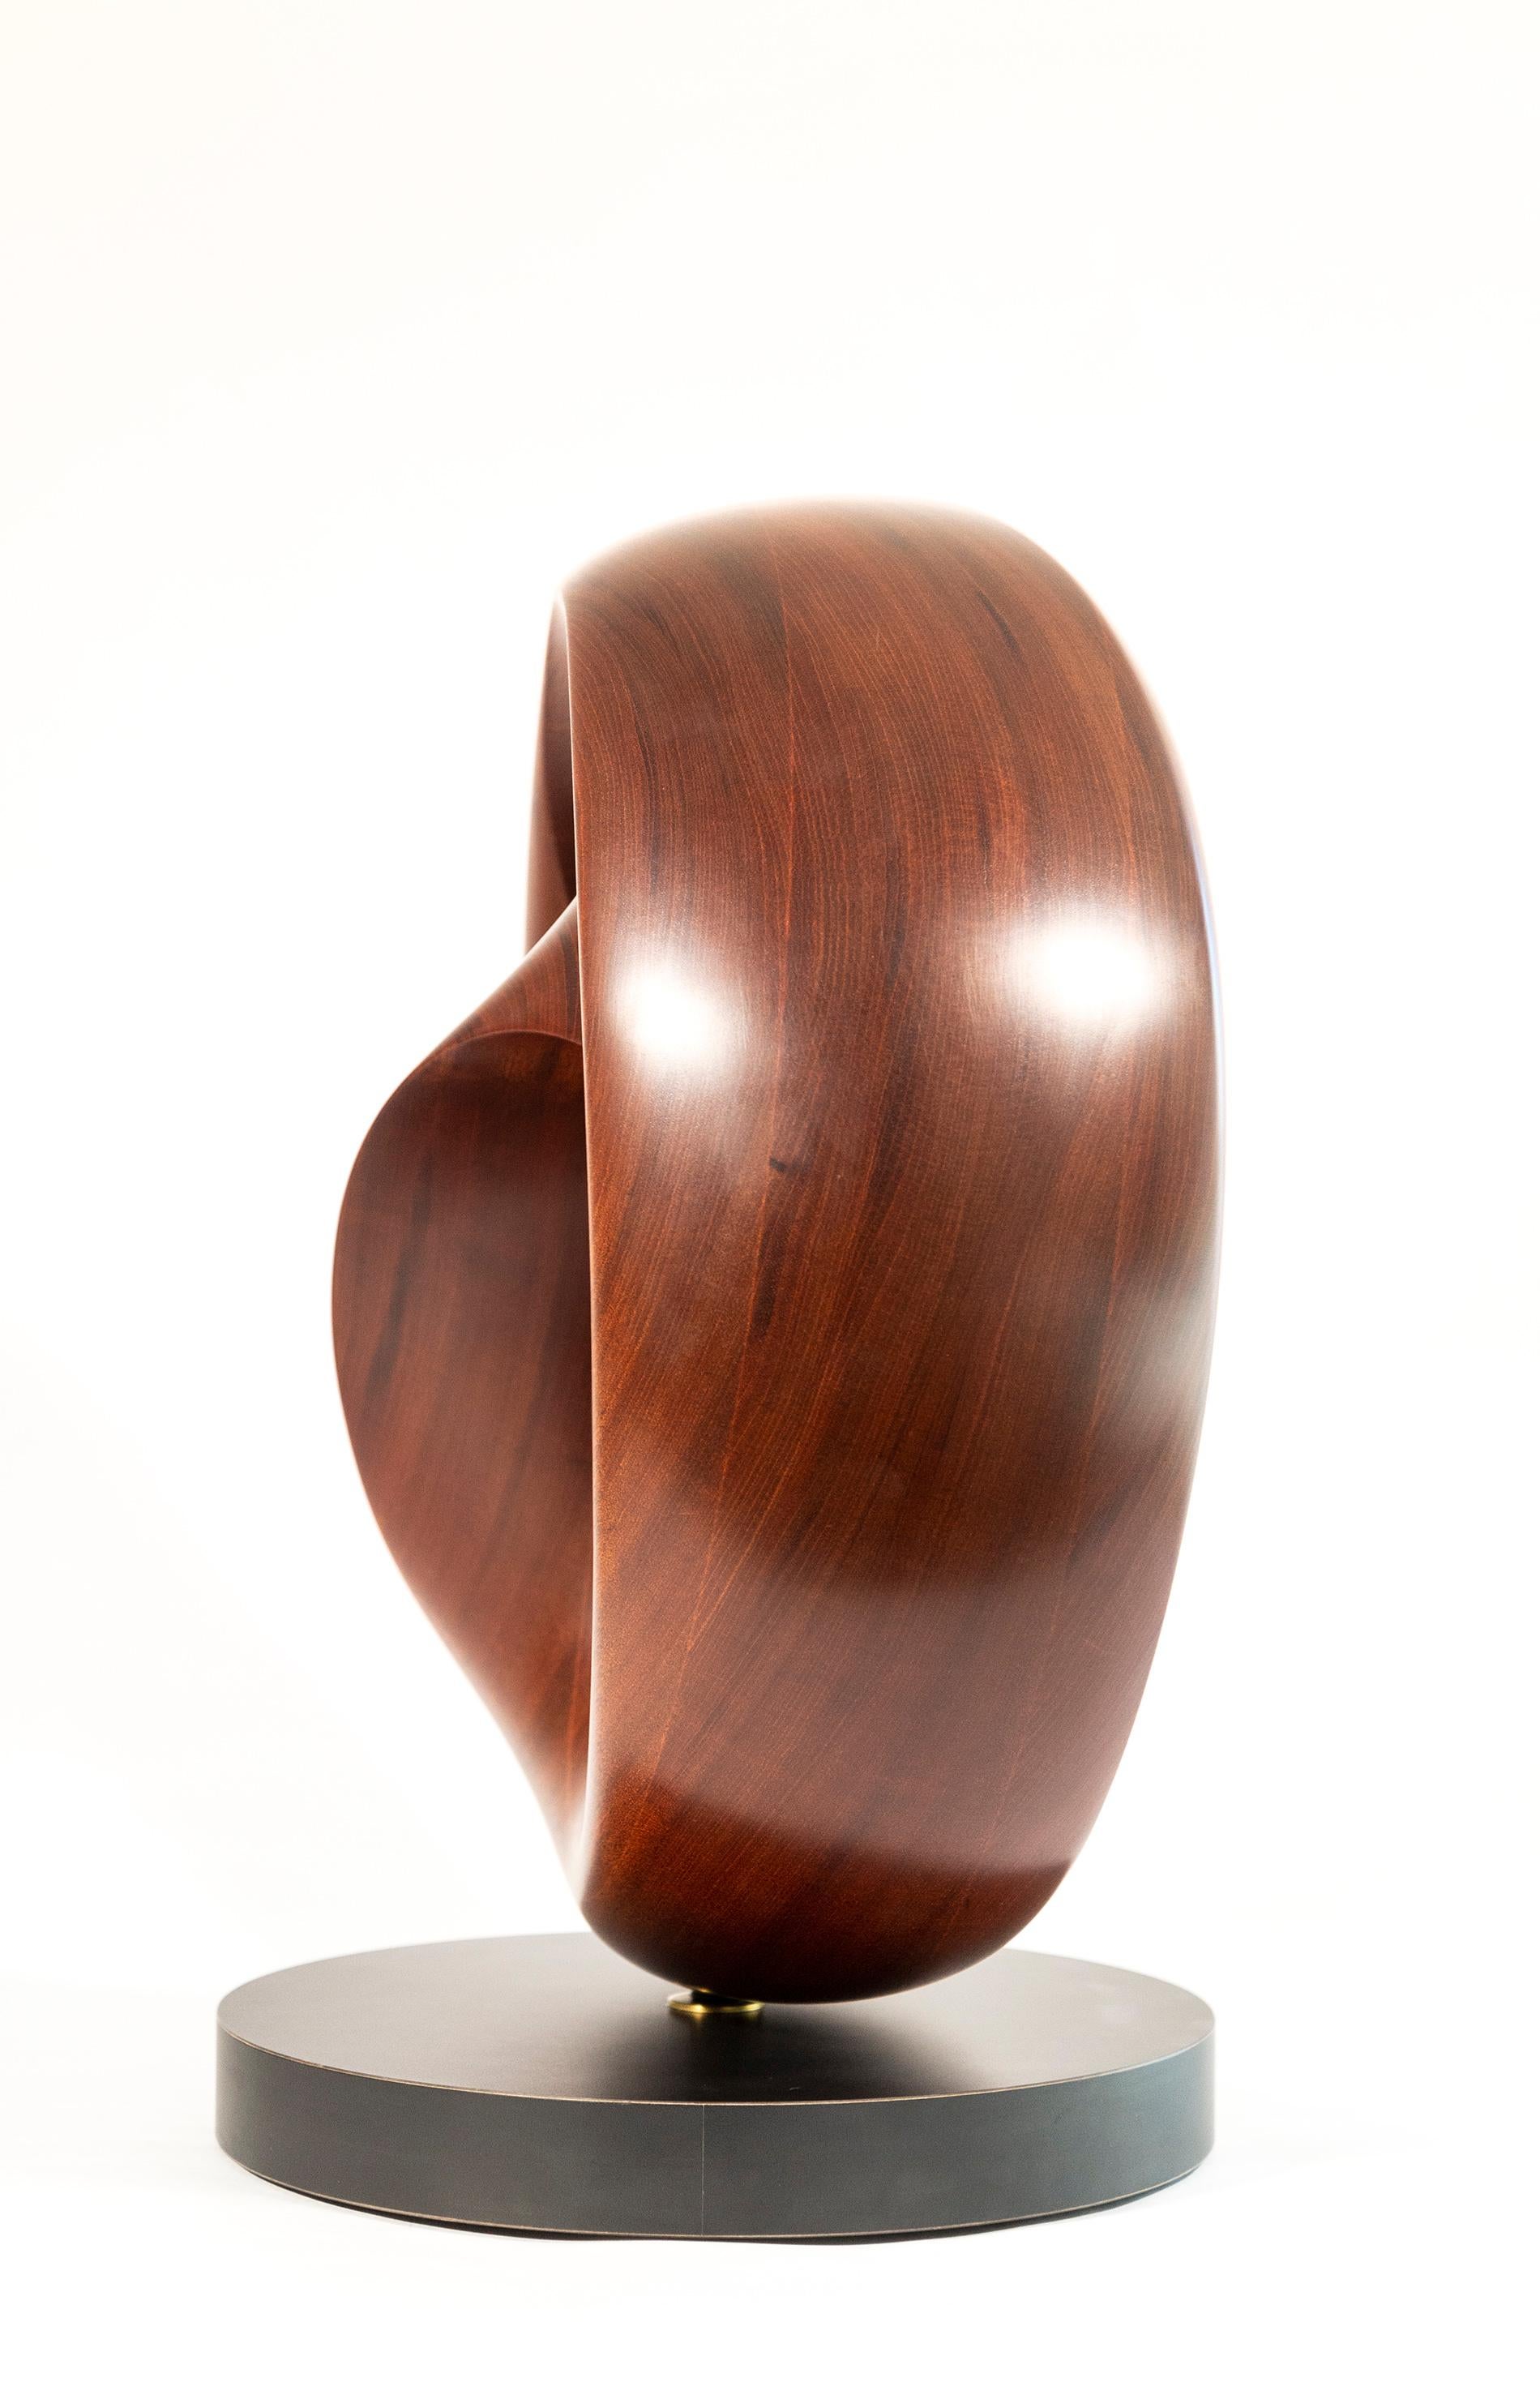 Fanfare - smooth, polished, abstract, contemporary, mahogany carved sculpture 2